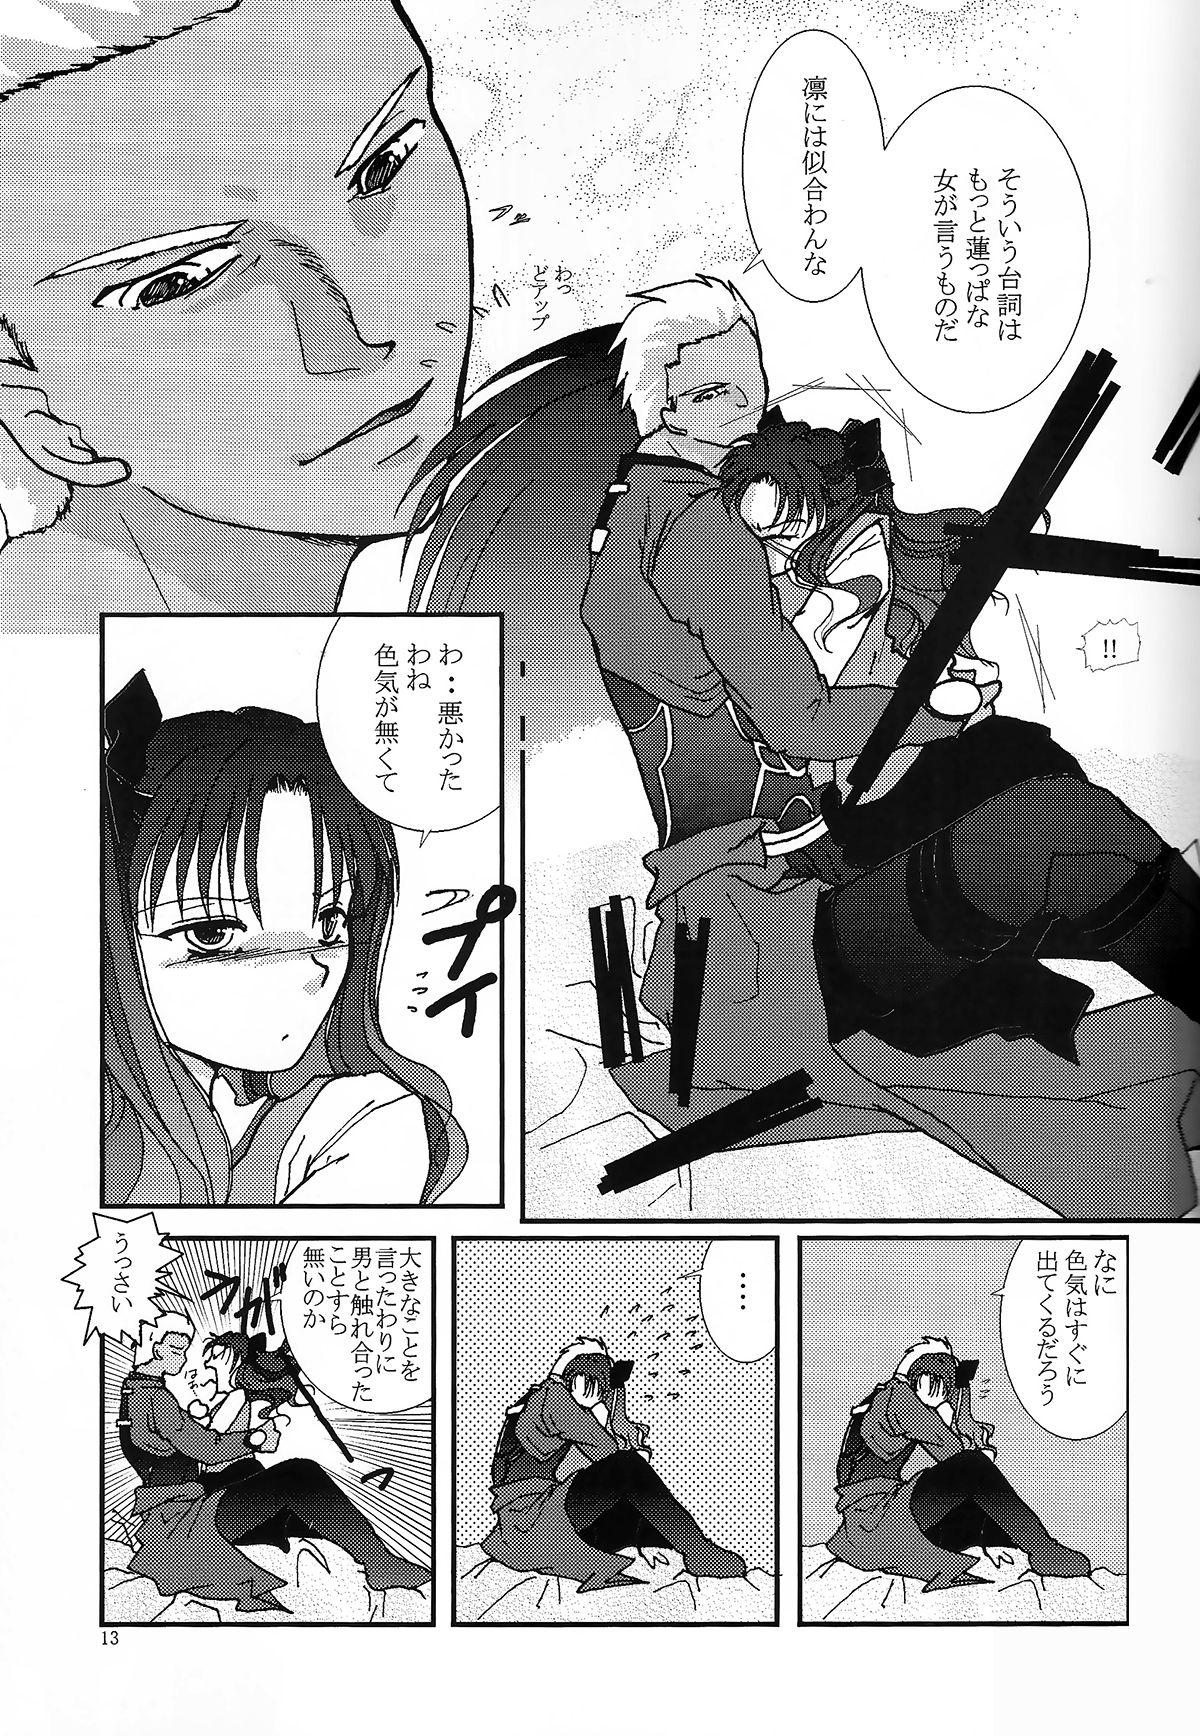 Cuck Question-7 - Fate stay night Hard Porn - Page 11